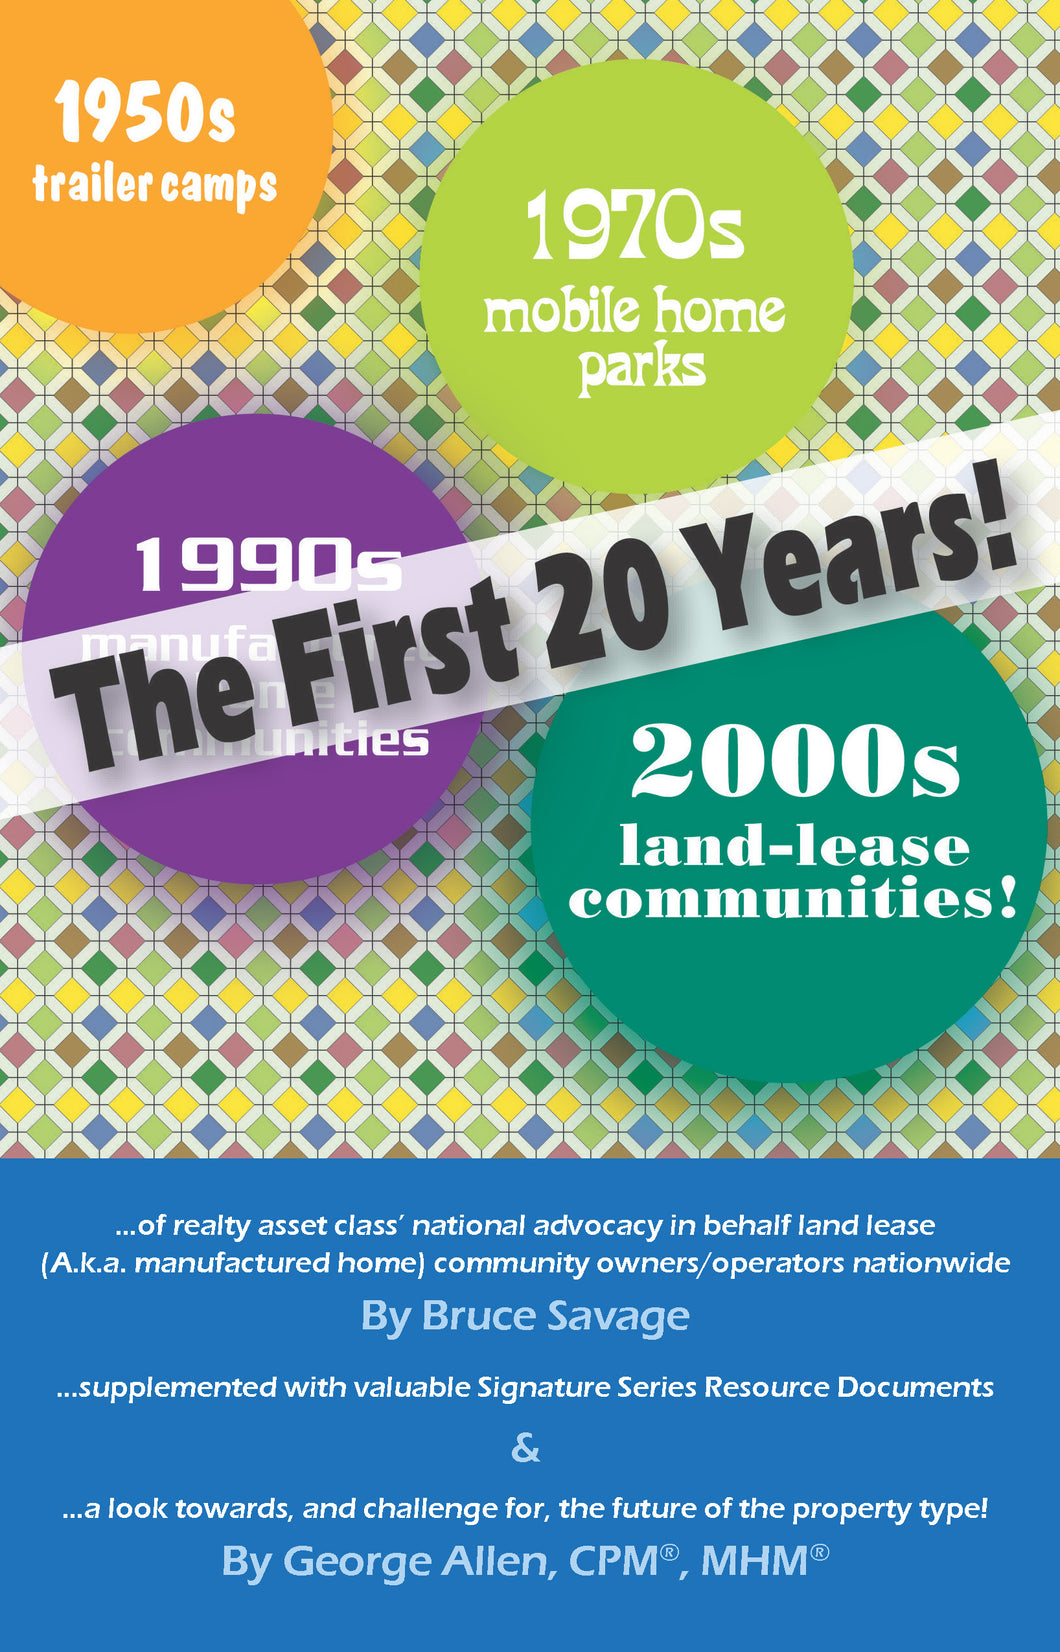 TWO DECADES OF MOBILE HOME COMMUNITIES (PDF download)